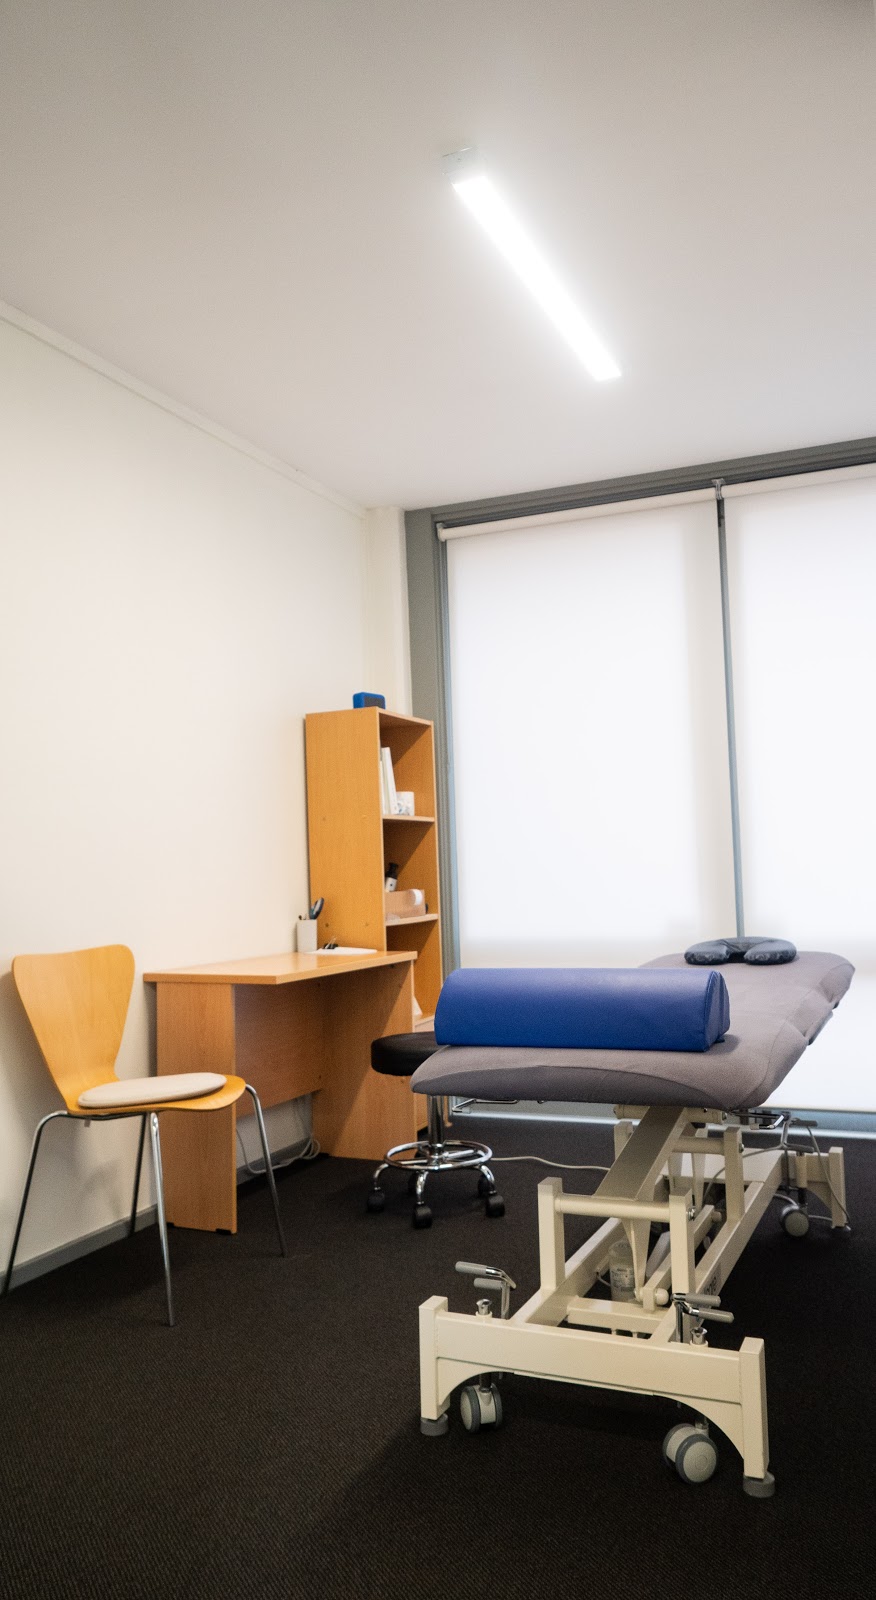 Movement Science Physiotherapy | physiotherapist | 1/181 High St, North Willoughby NSW 2068, Australia | 0285407319 OR +61 2 8540 7319